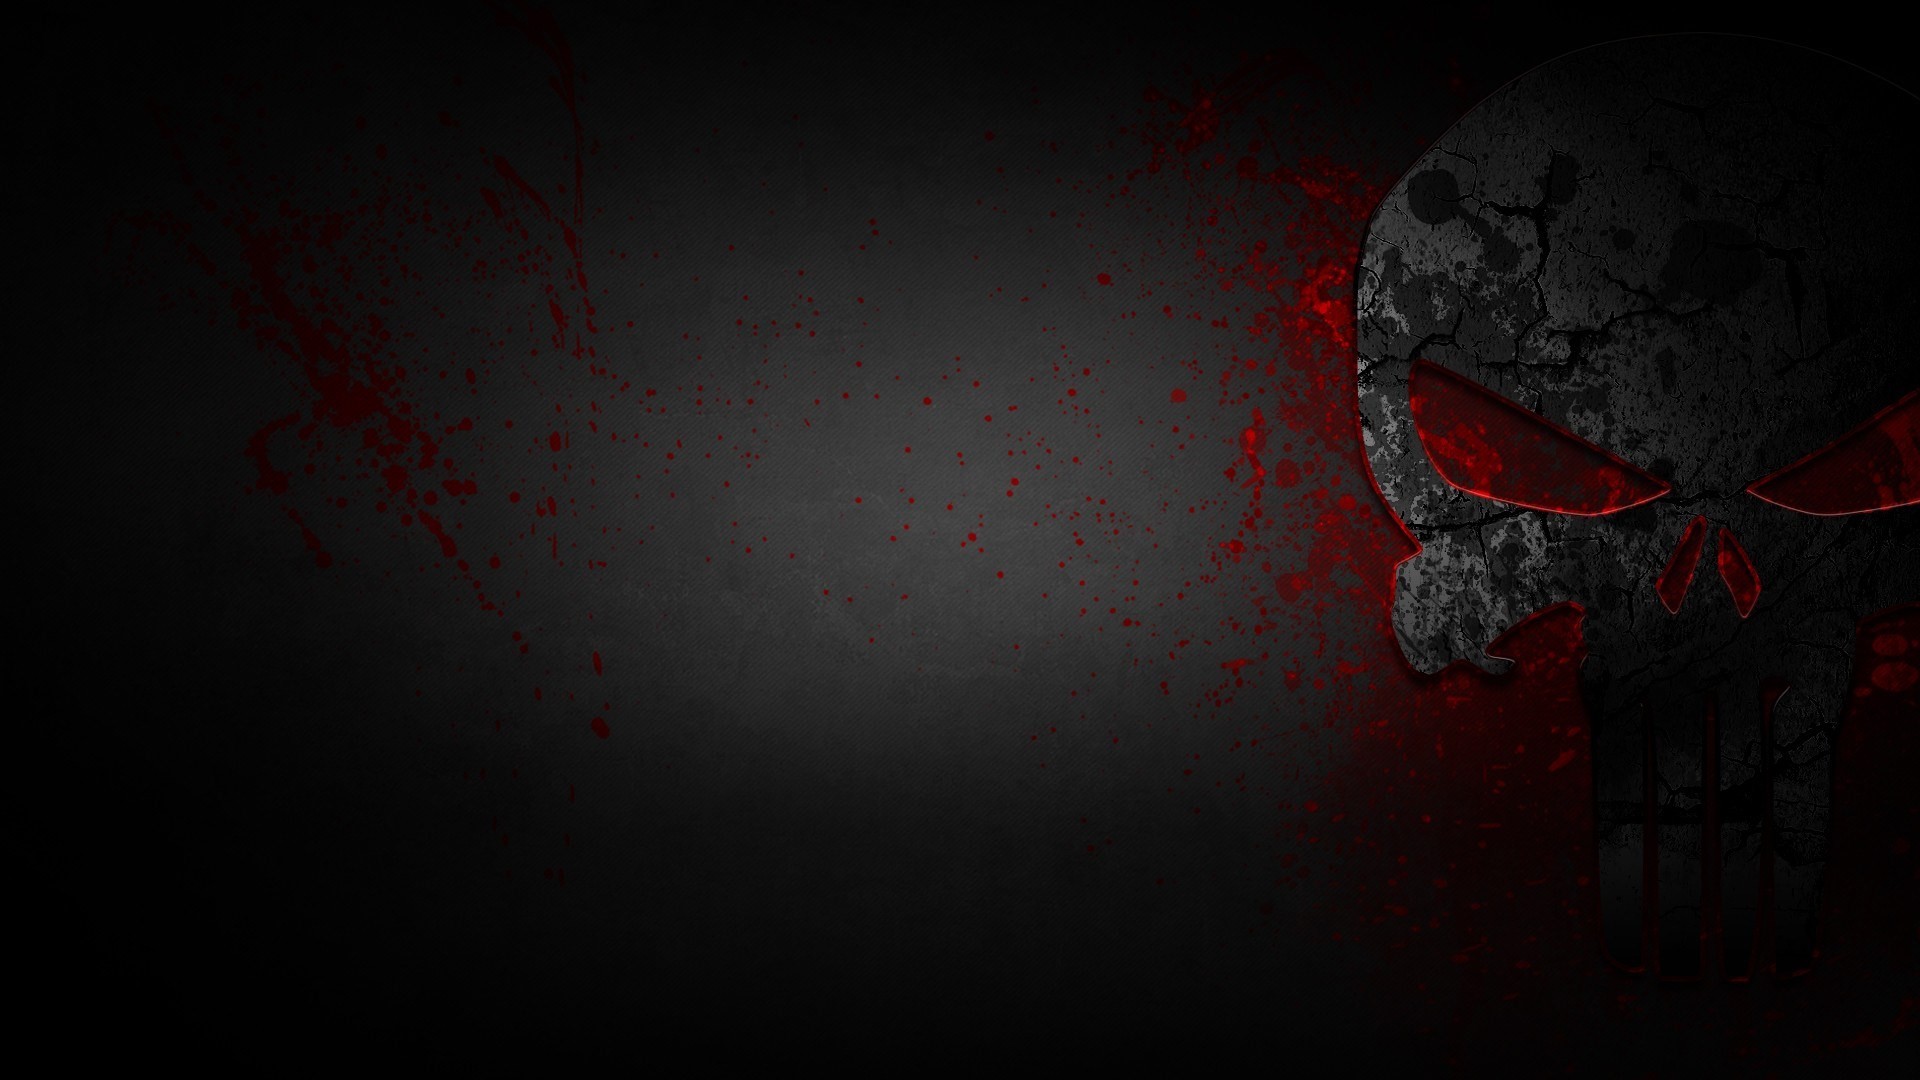 Punisher HD Wallpapers / Backgrounds For Free Download, BsnSCB 19201080 Punisher Backgrounds